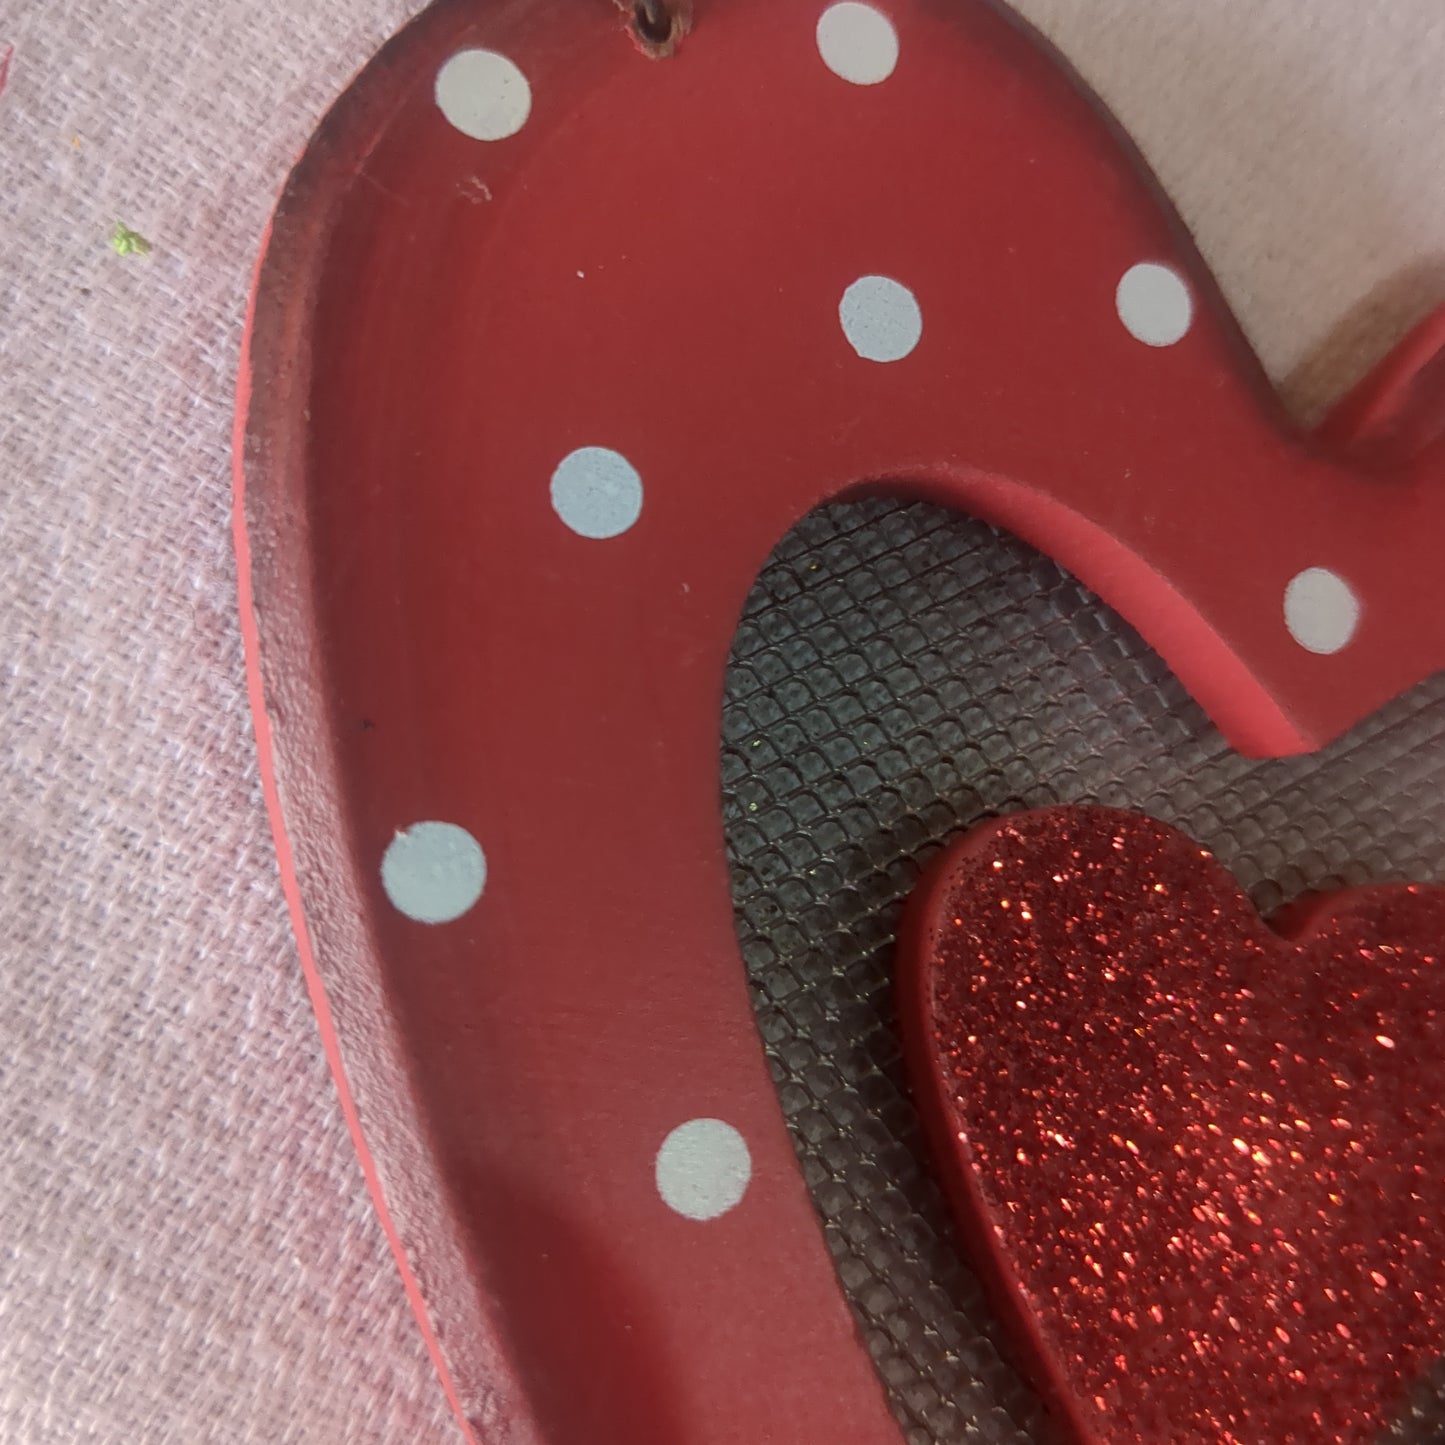 Wooden heart ornament for Valentine's Day